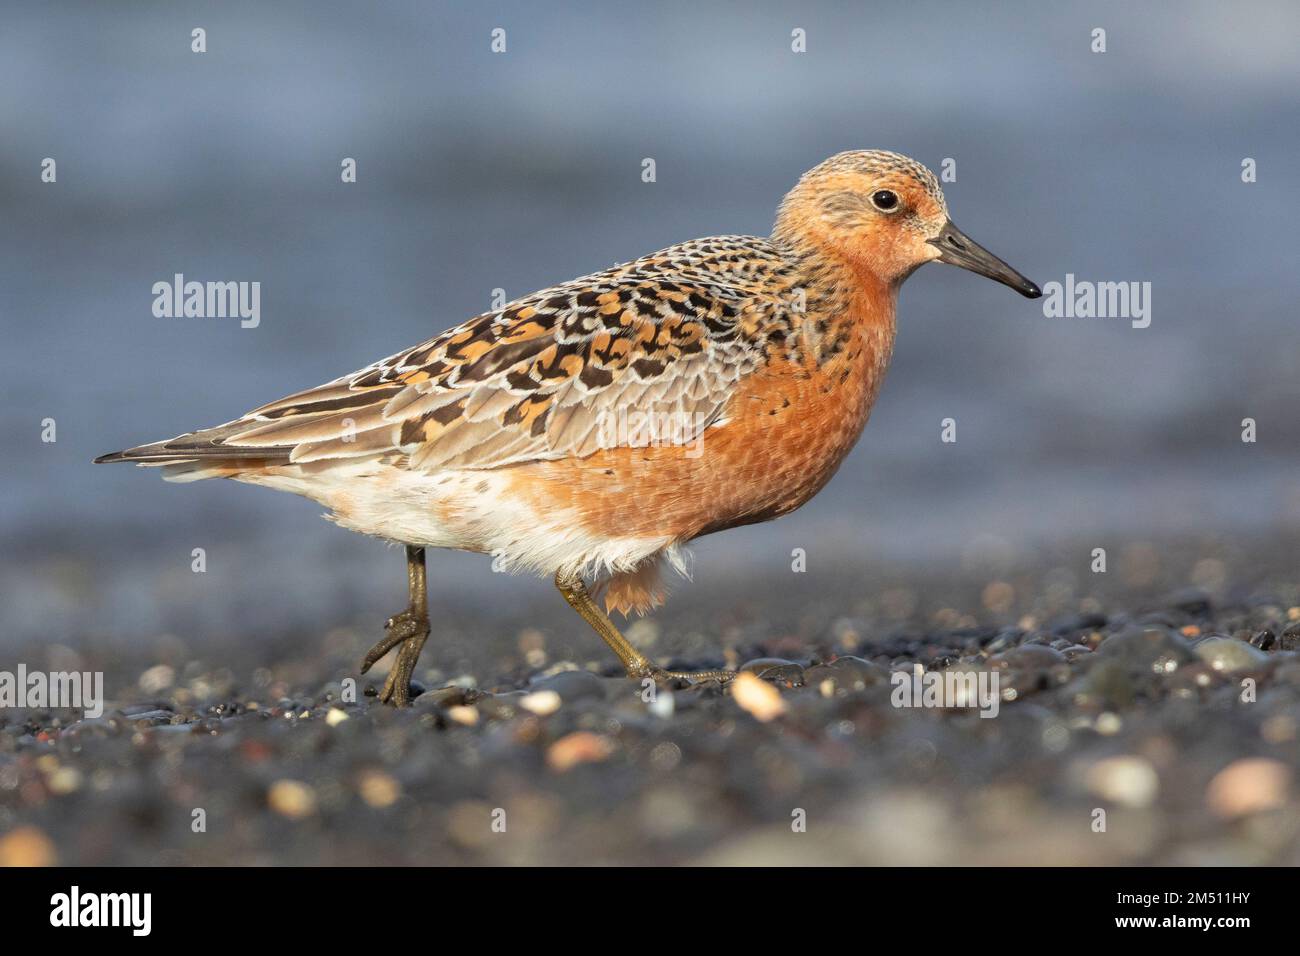 Red Knot (Calidris canutus islandica), side view of an adult standing on the shore, Northwestern Region, Iceland Stock Photo